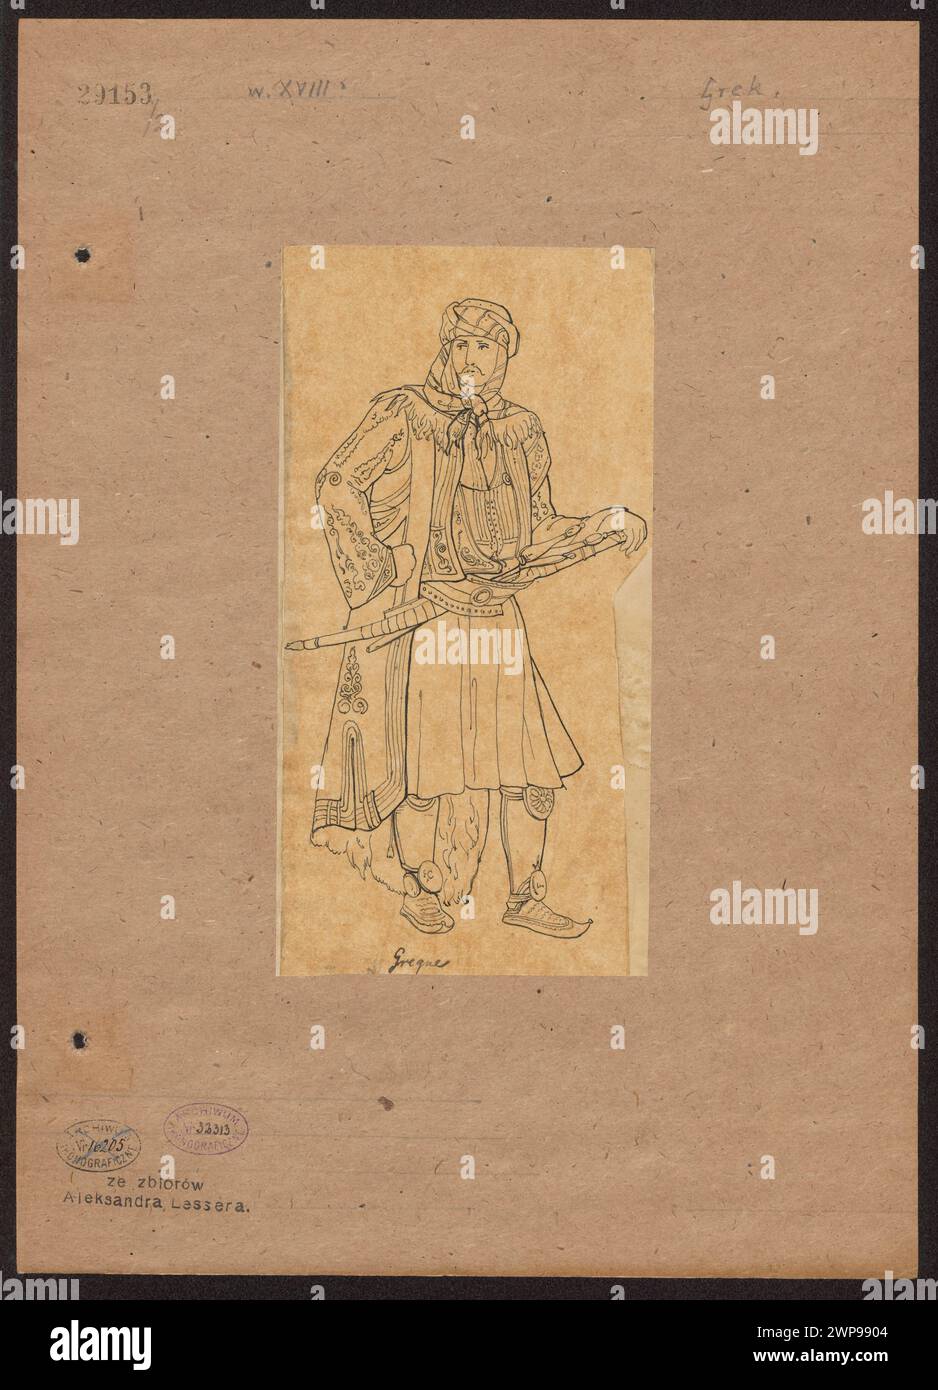 Greek warrior in an outfit from the 18th century; Lesser, Aleksander (1814-1884); 1830-1884 (1830-00-00-1884-00-00);Greeks, Lesser, Aleksander (1814-1884), Lesser, Aleksander (1814-1884) - collections, Lesser, Emiljan Stanisław (Baron - 1847-1912), Lesser, Emiljan Stanisław (Baron - 1847-1912) - collection, Lesser, Wiktor Stanisław Zygmunt (Baron - 1853-1935), Lesser, Wiktor Stanisław Zygmunt (Baron - 1853-1935) - collection, gift (provenance), clothing, men's clothes, warriors Stock Photo